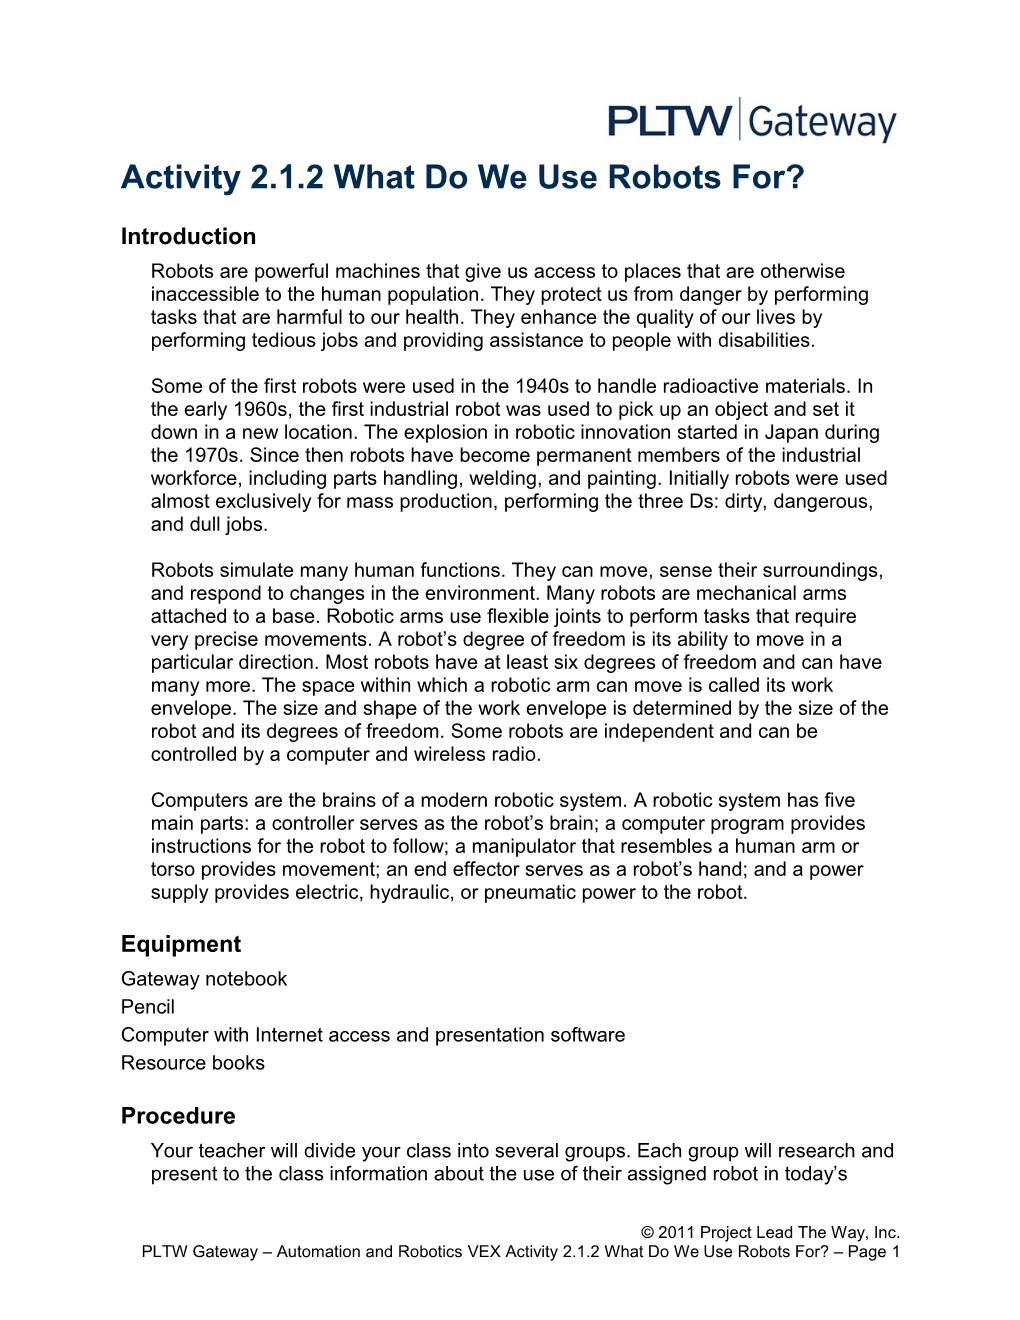 Activity 2.1.2 What Do We Use Robots For?